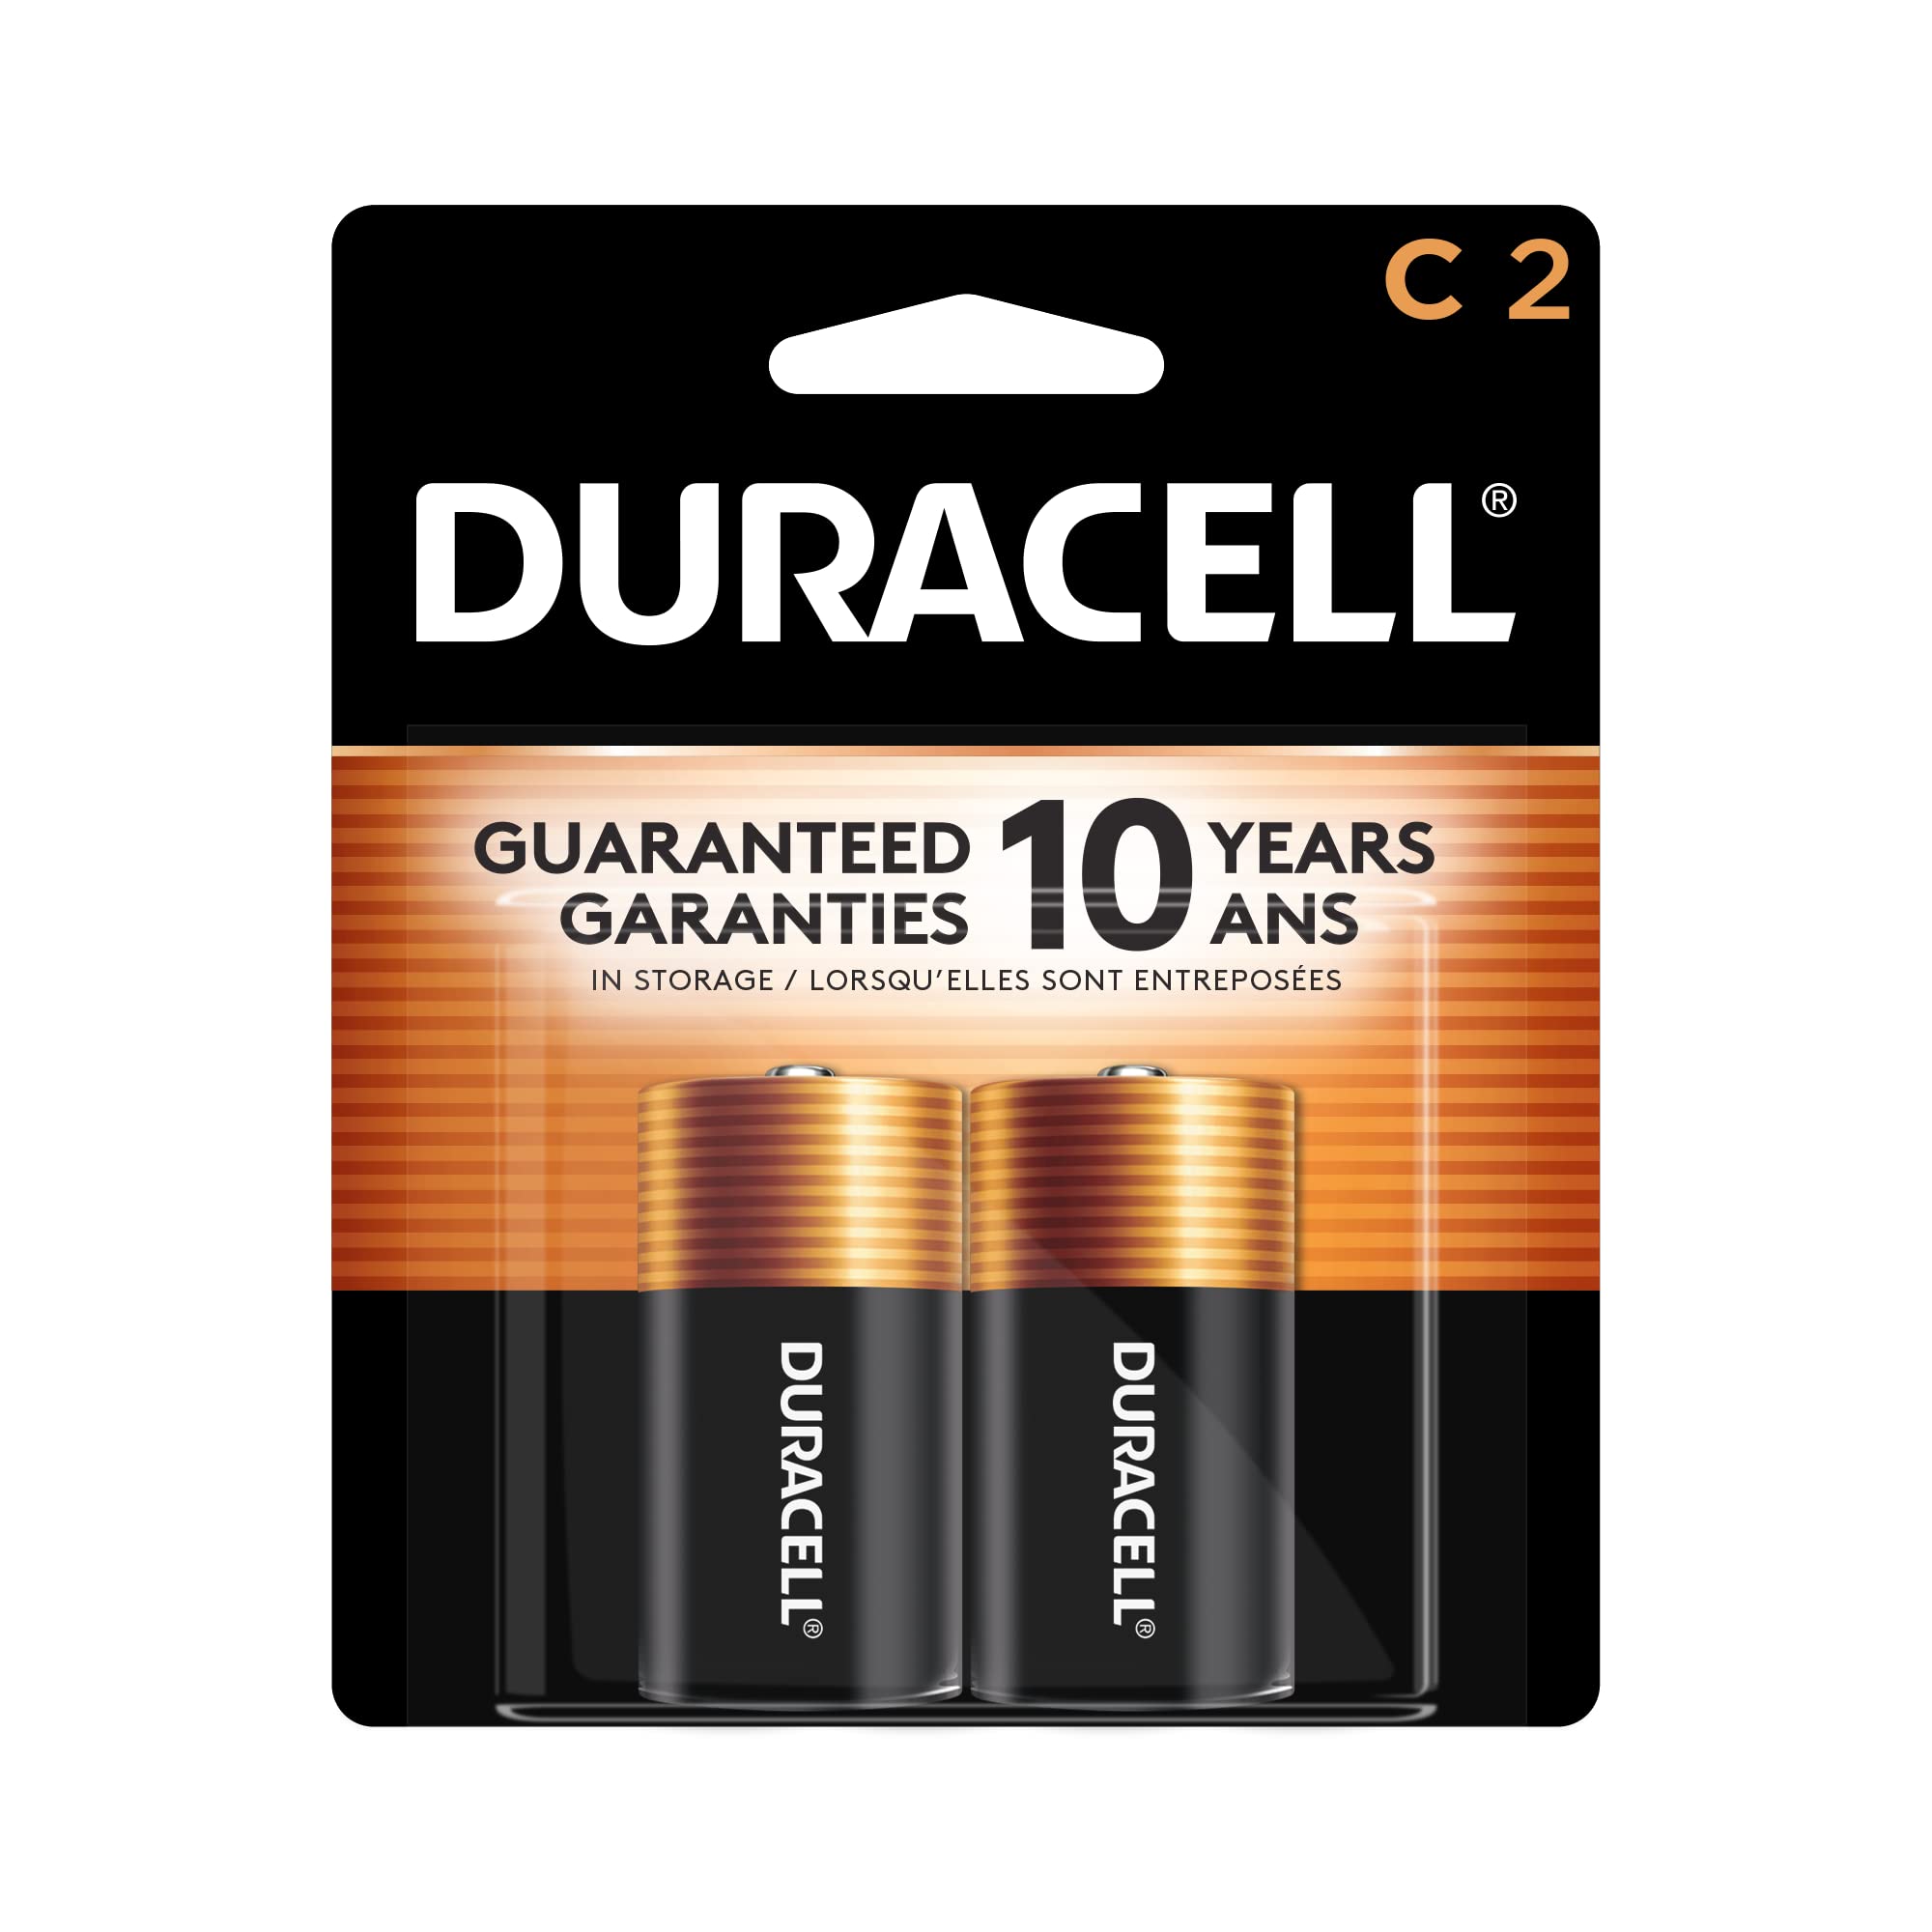 DURACELL Coppertop 1.5V Size C Alkaline Battery, (Pack of 16) - image 1 of 5